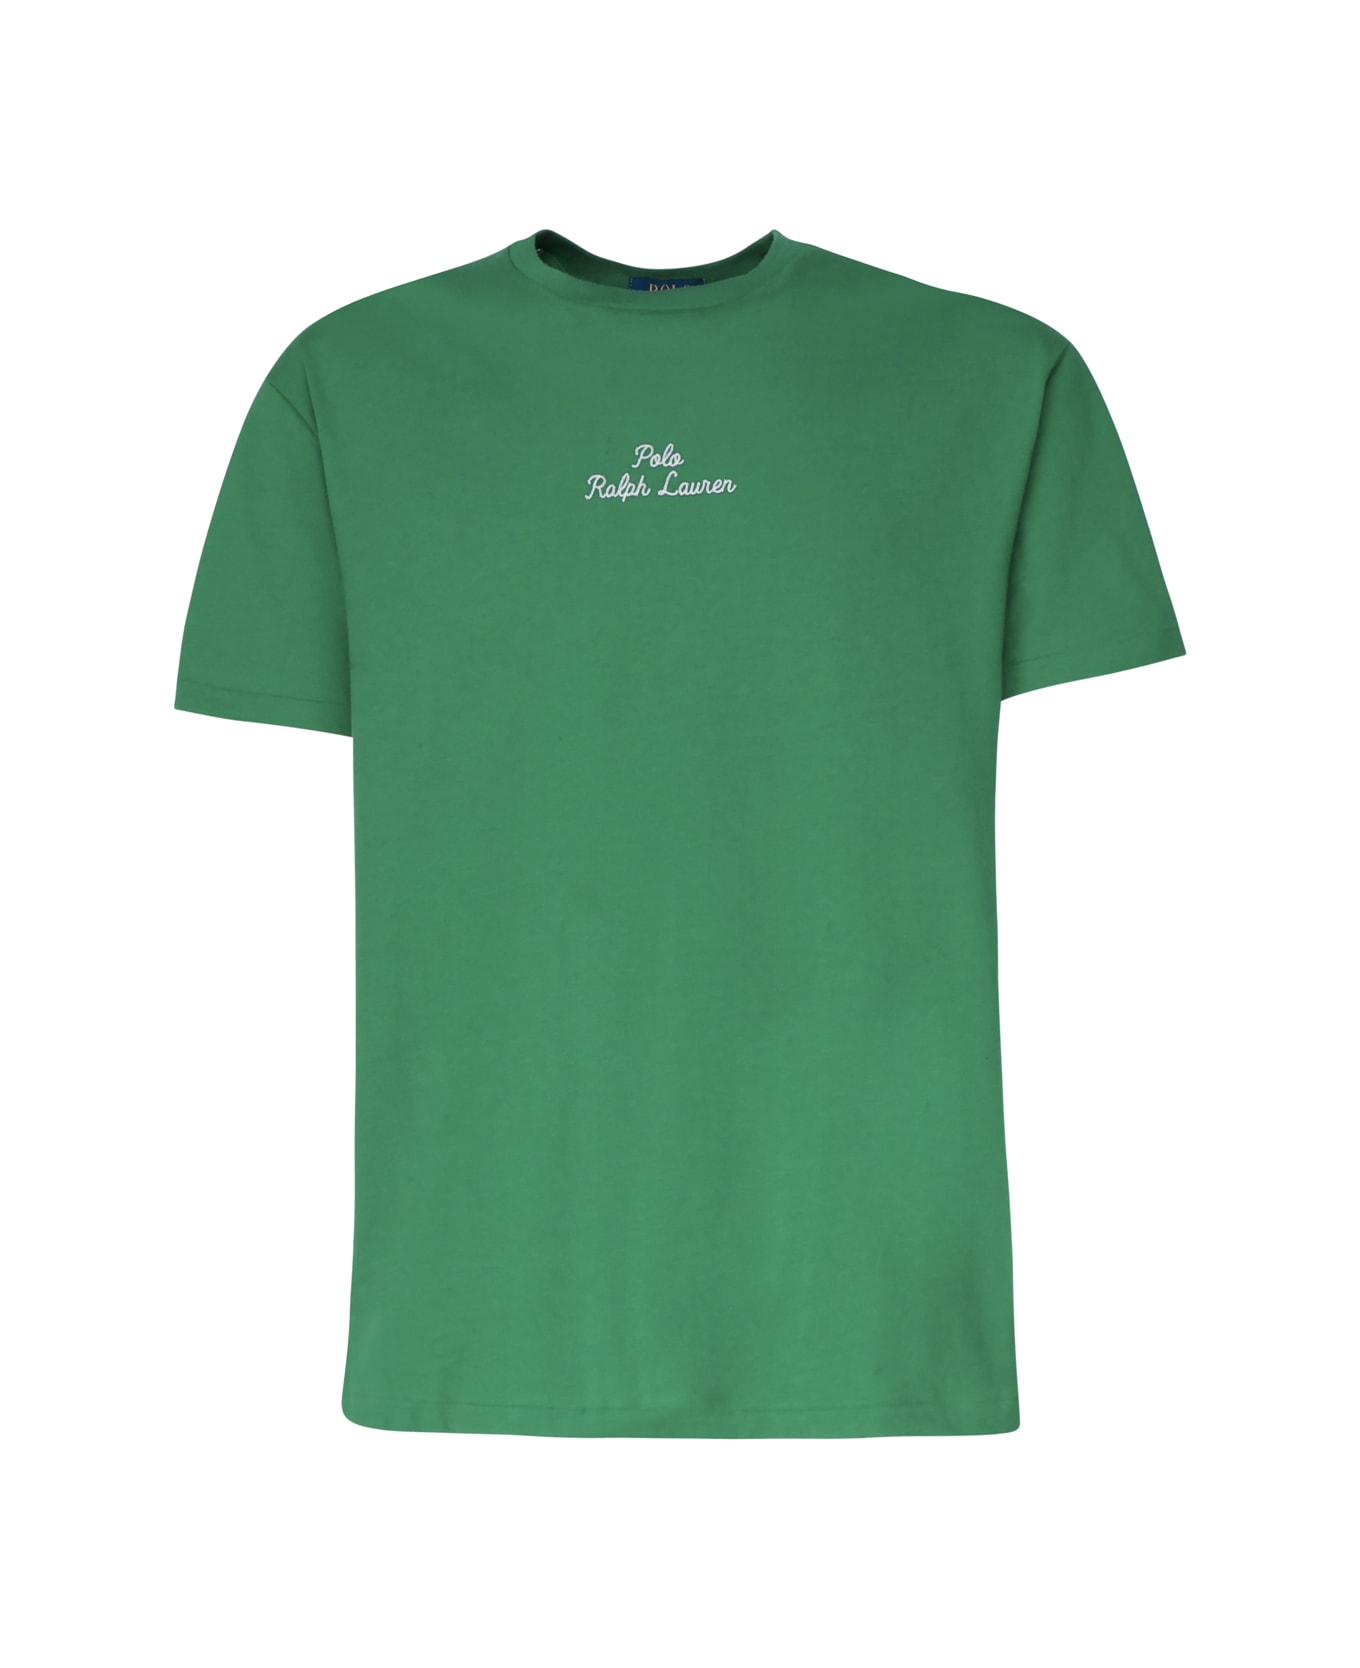 Polo Ralph Lauren T-shirt With Embroidery - Green